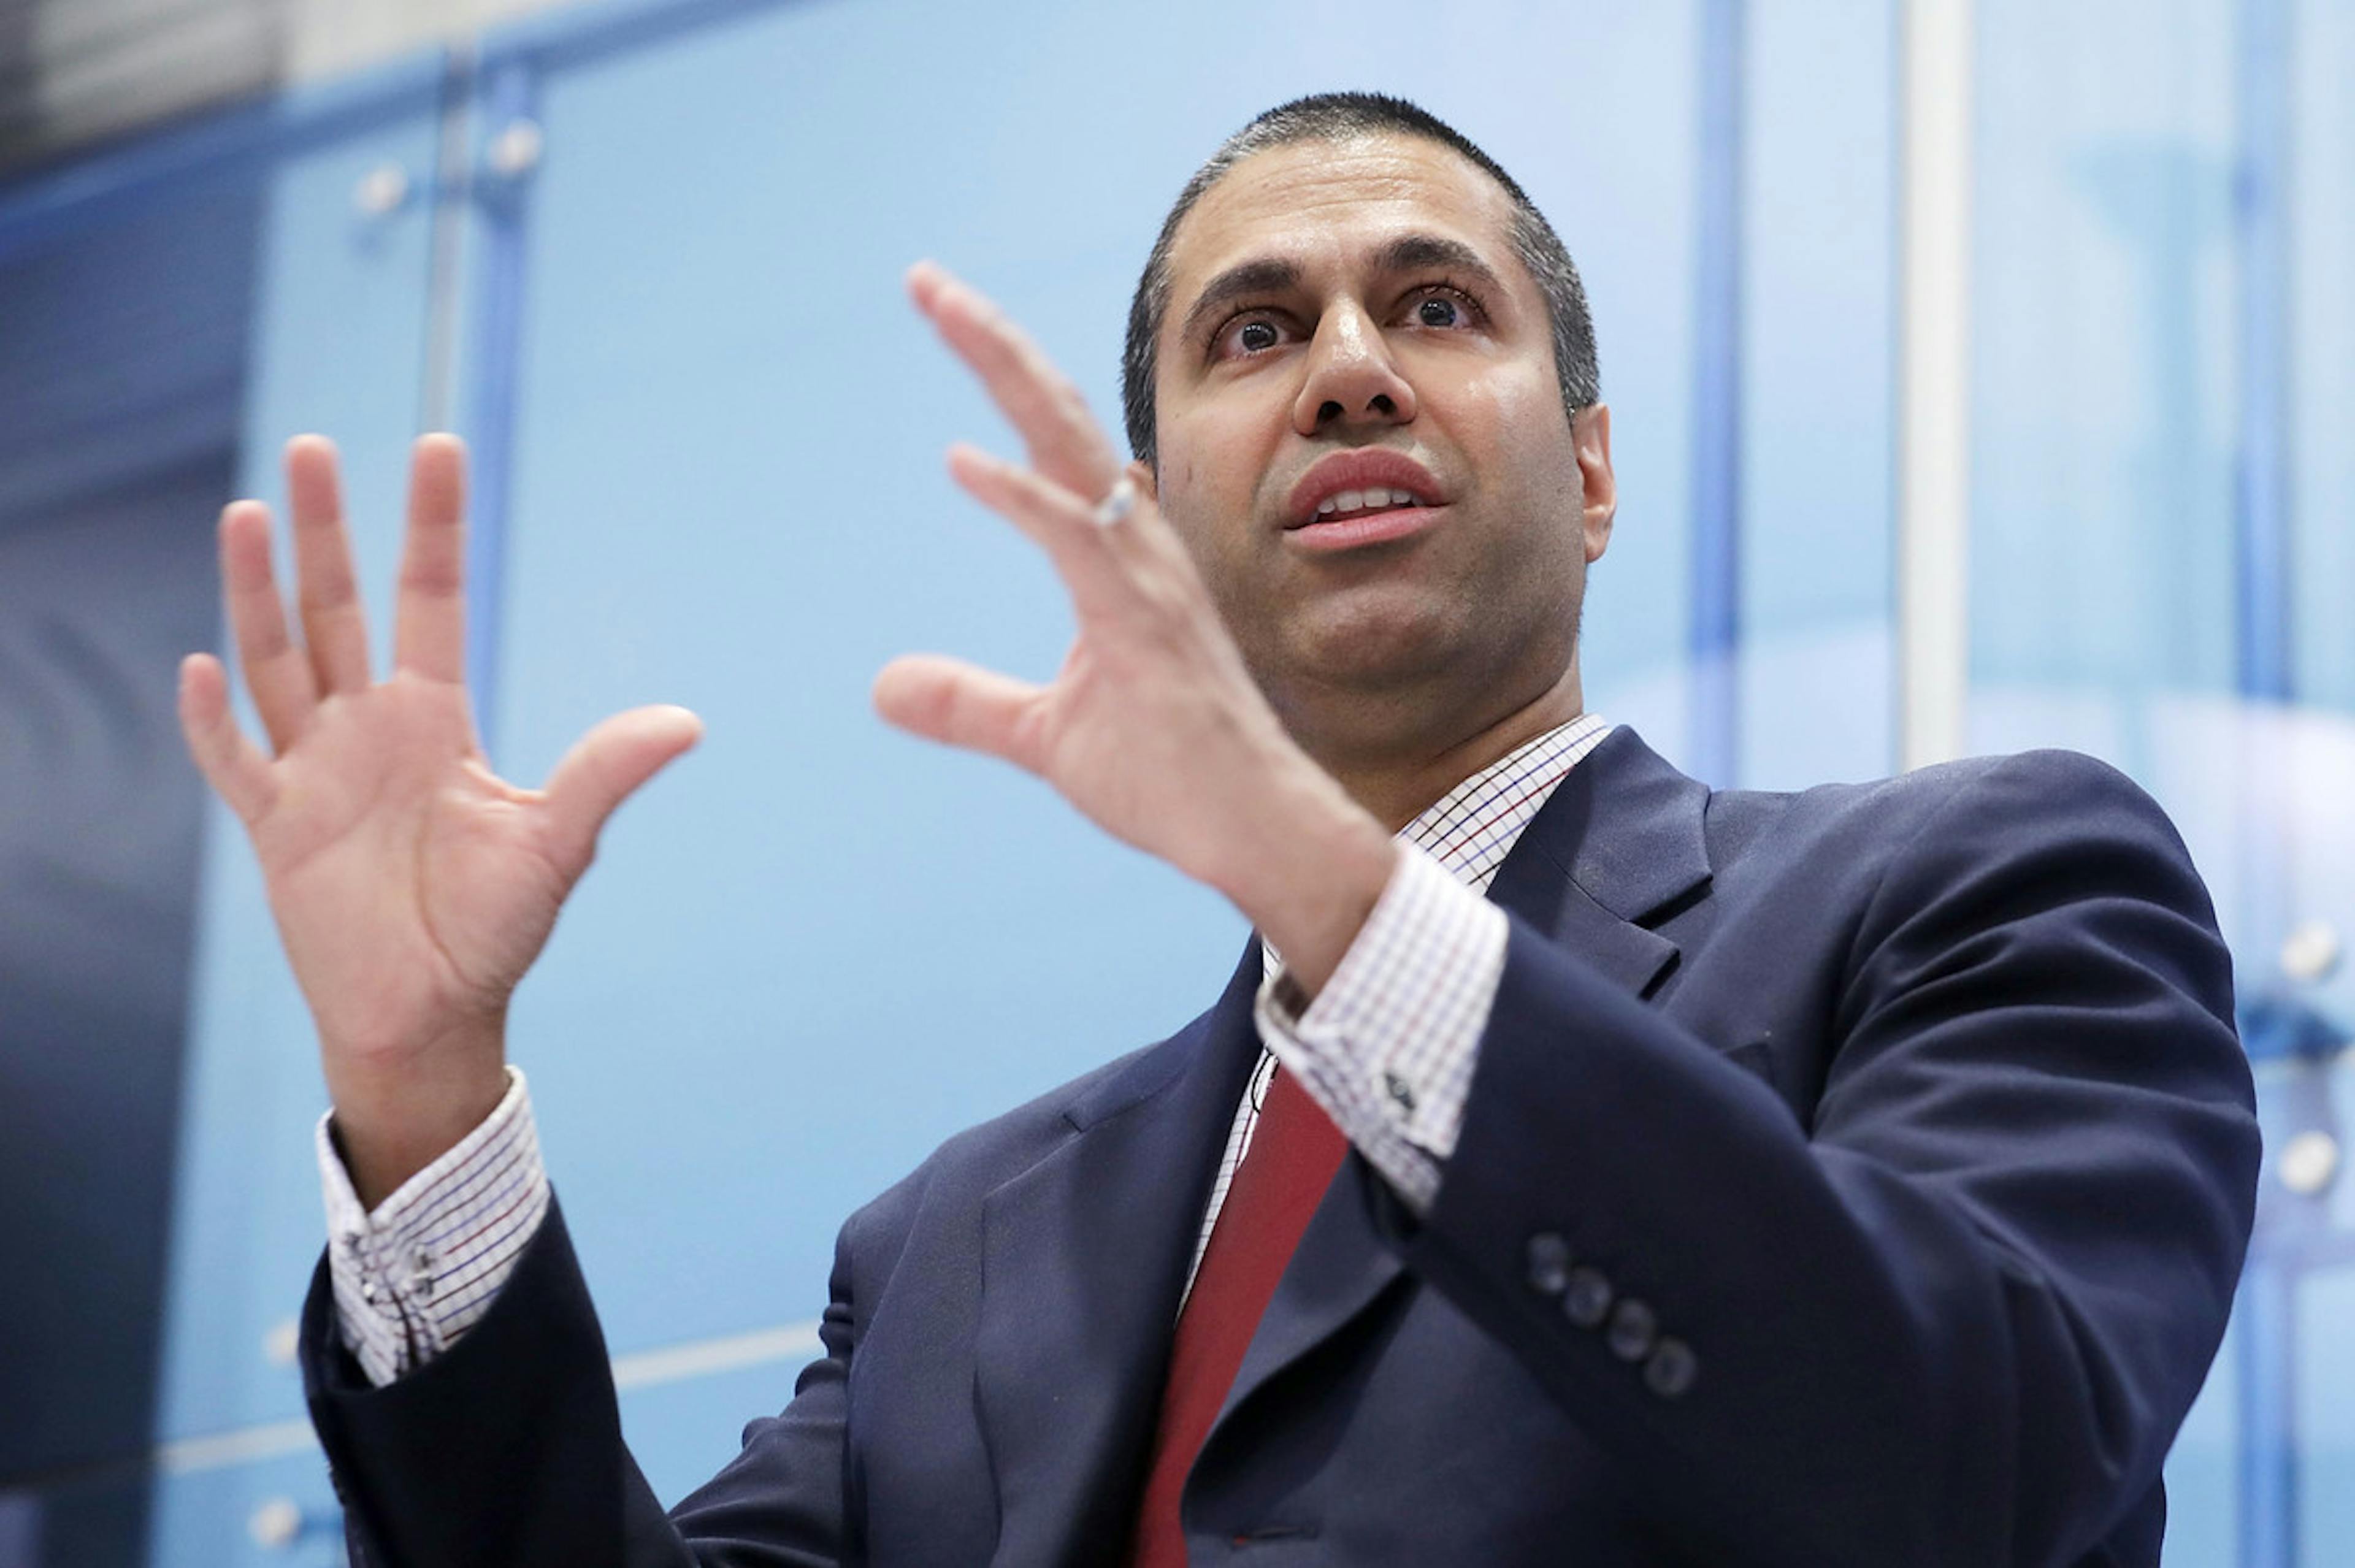 FCC Chairman Ajit Pai, shown in 2017, was an evangelist for 5G. He regularly cited a report proclaiming that the technology could create up to 3 million jobs, without noting that those figures came from a study commissioned by the wireless industry’s lobbying group. Credit: Chip Somodevilla/Getty Images